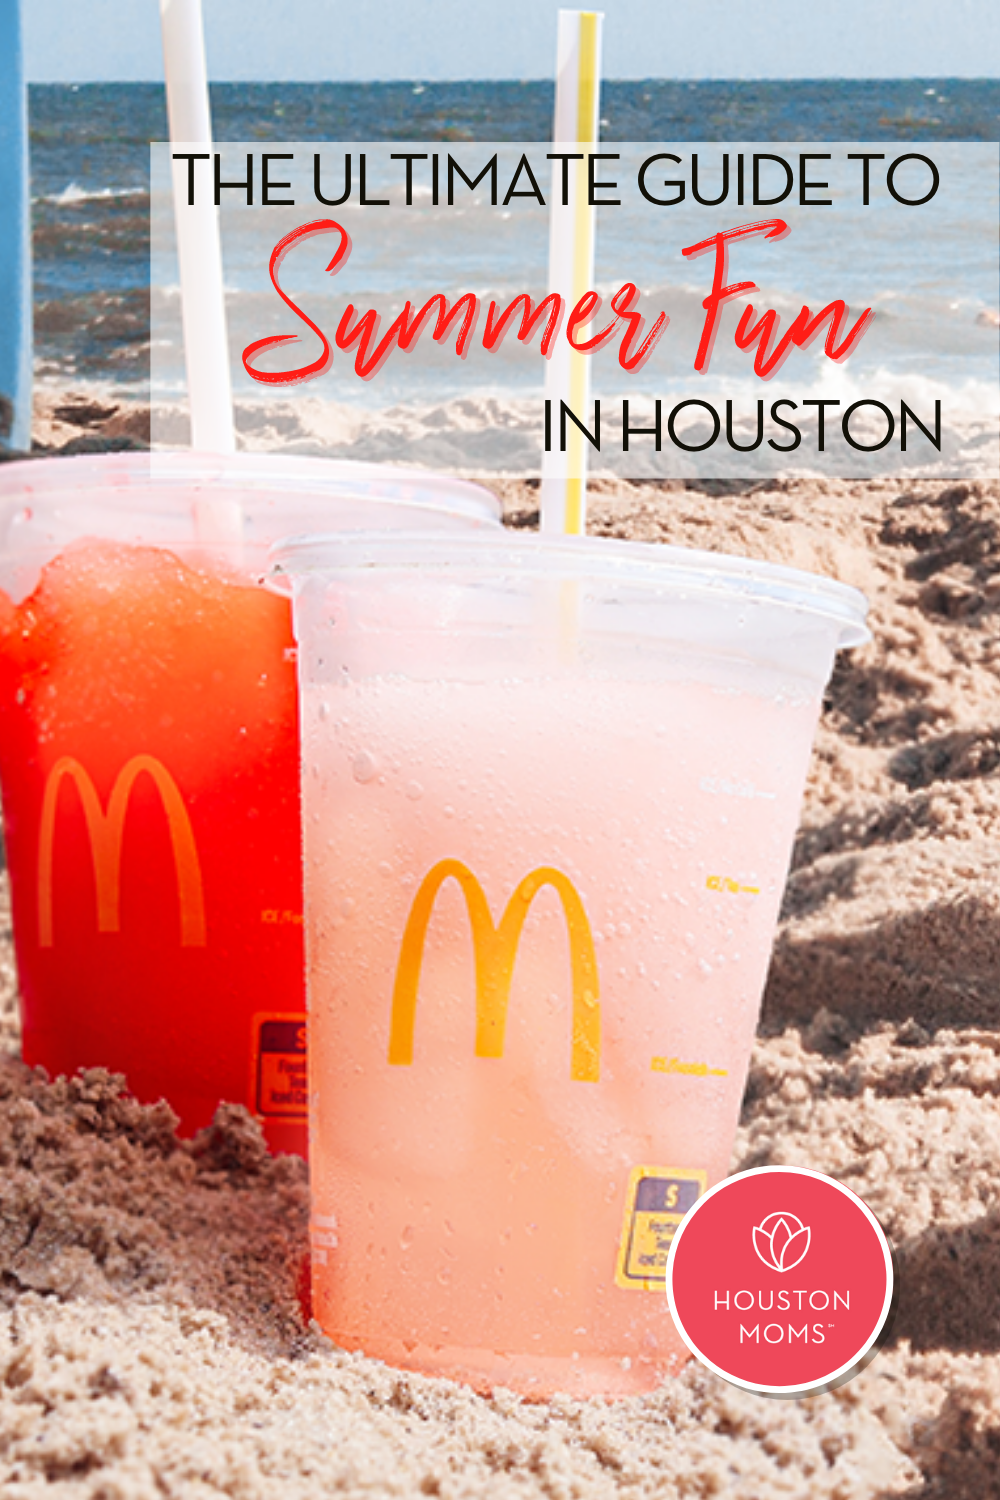 The Ultimate guide to Summer Fun in Houston. A photograph of Two McDonald's drinks in the sand at a beach. Logo: Houston moms. 